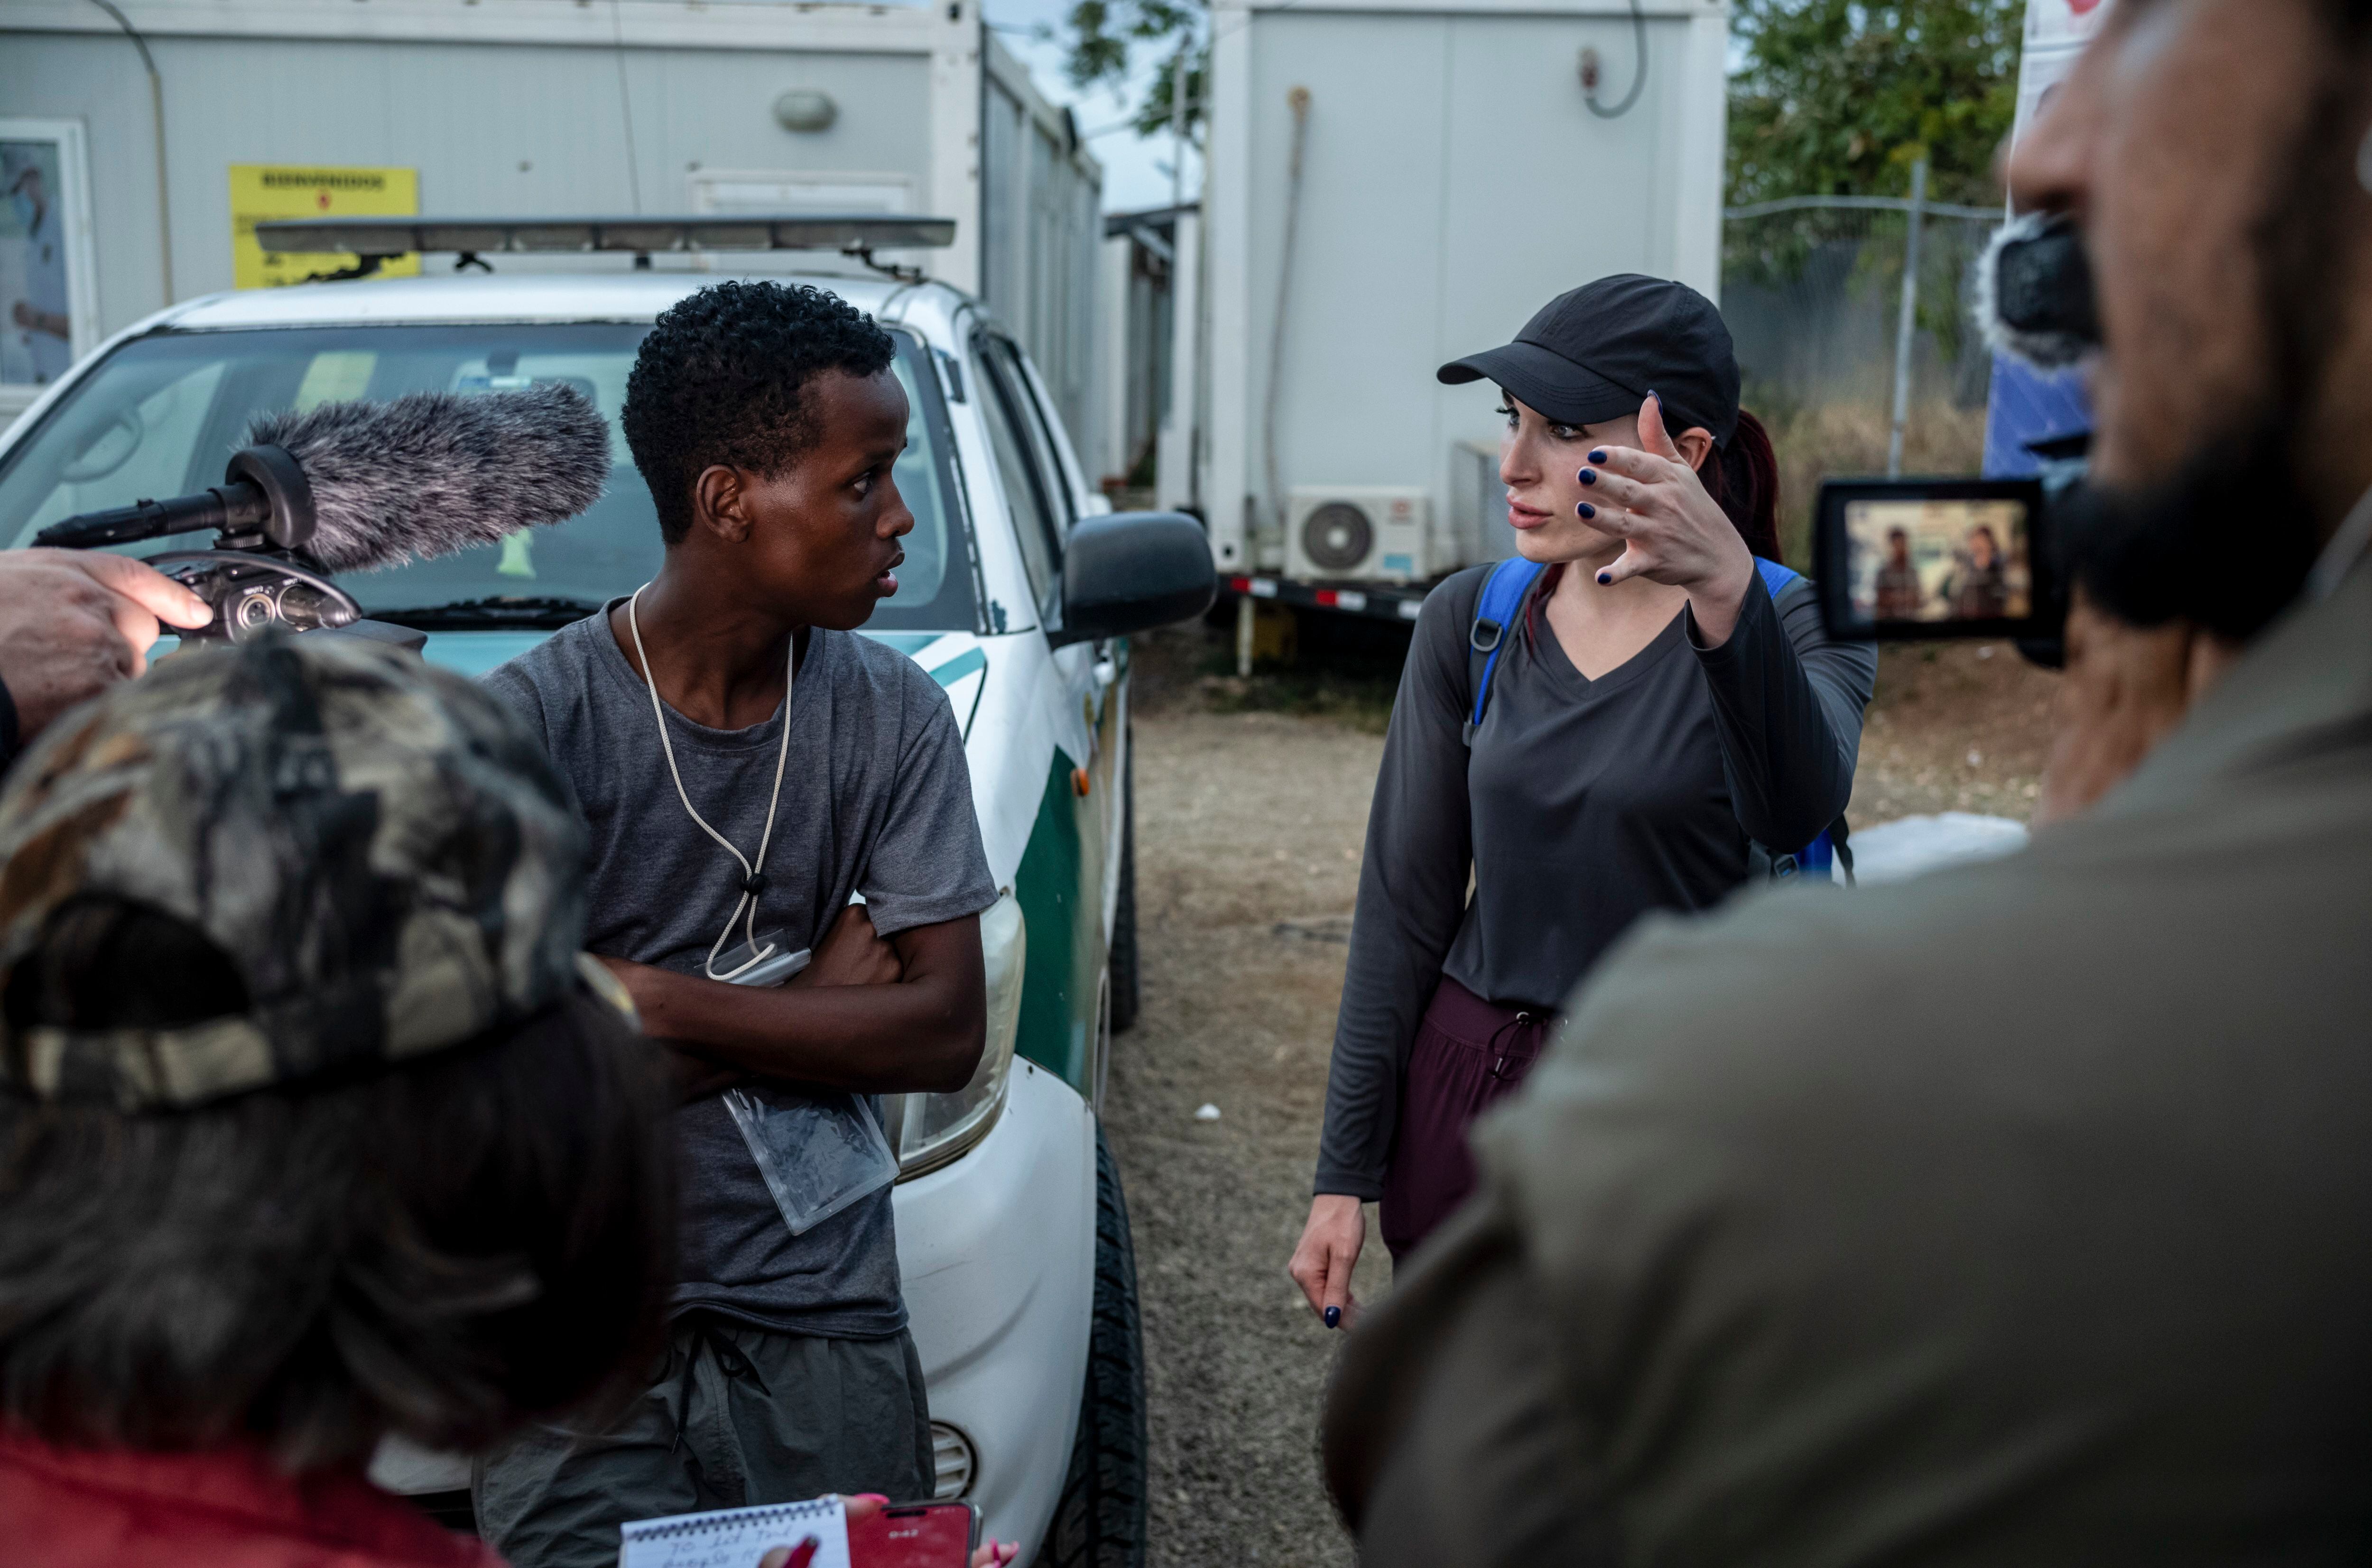 (Federico Rios | The New York Times) Laura Loomer, a right-wing activist, interviews Ayub, a Somalian migrant who is crossing the Darien Gap, at the Migrant Reception Center of San Vicente, Meteti, Panama, on Feb. 17, 2024. The treacherous migrant crossing in Panama is drawing packs of American activists who are distorting how immigration is perceived and debated at home.